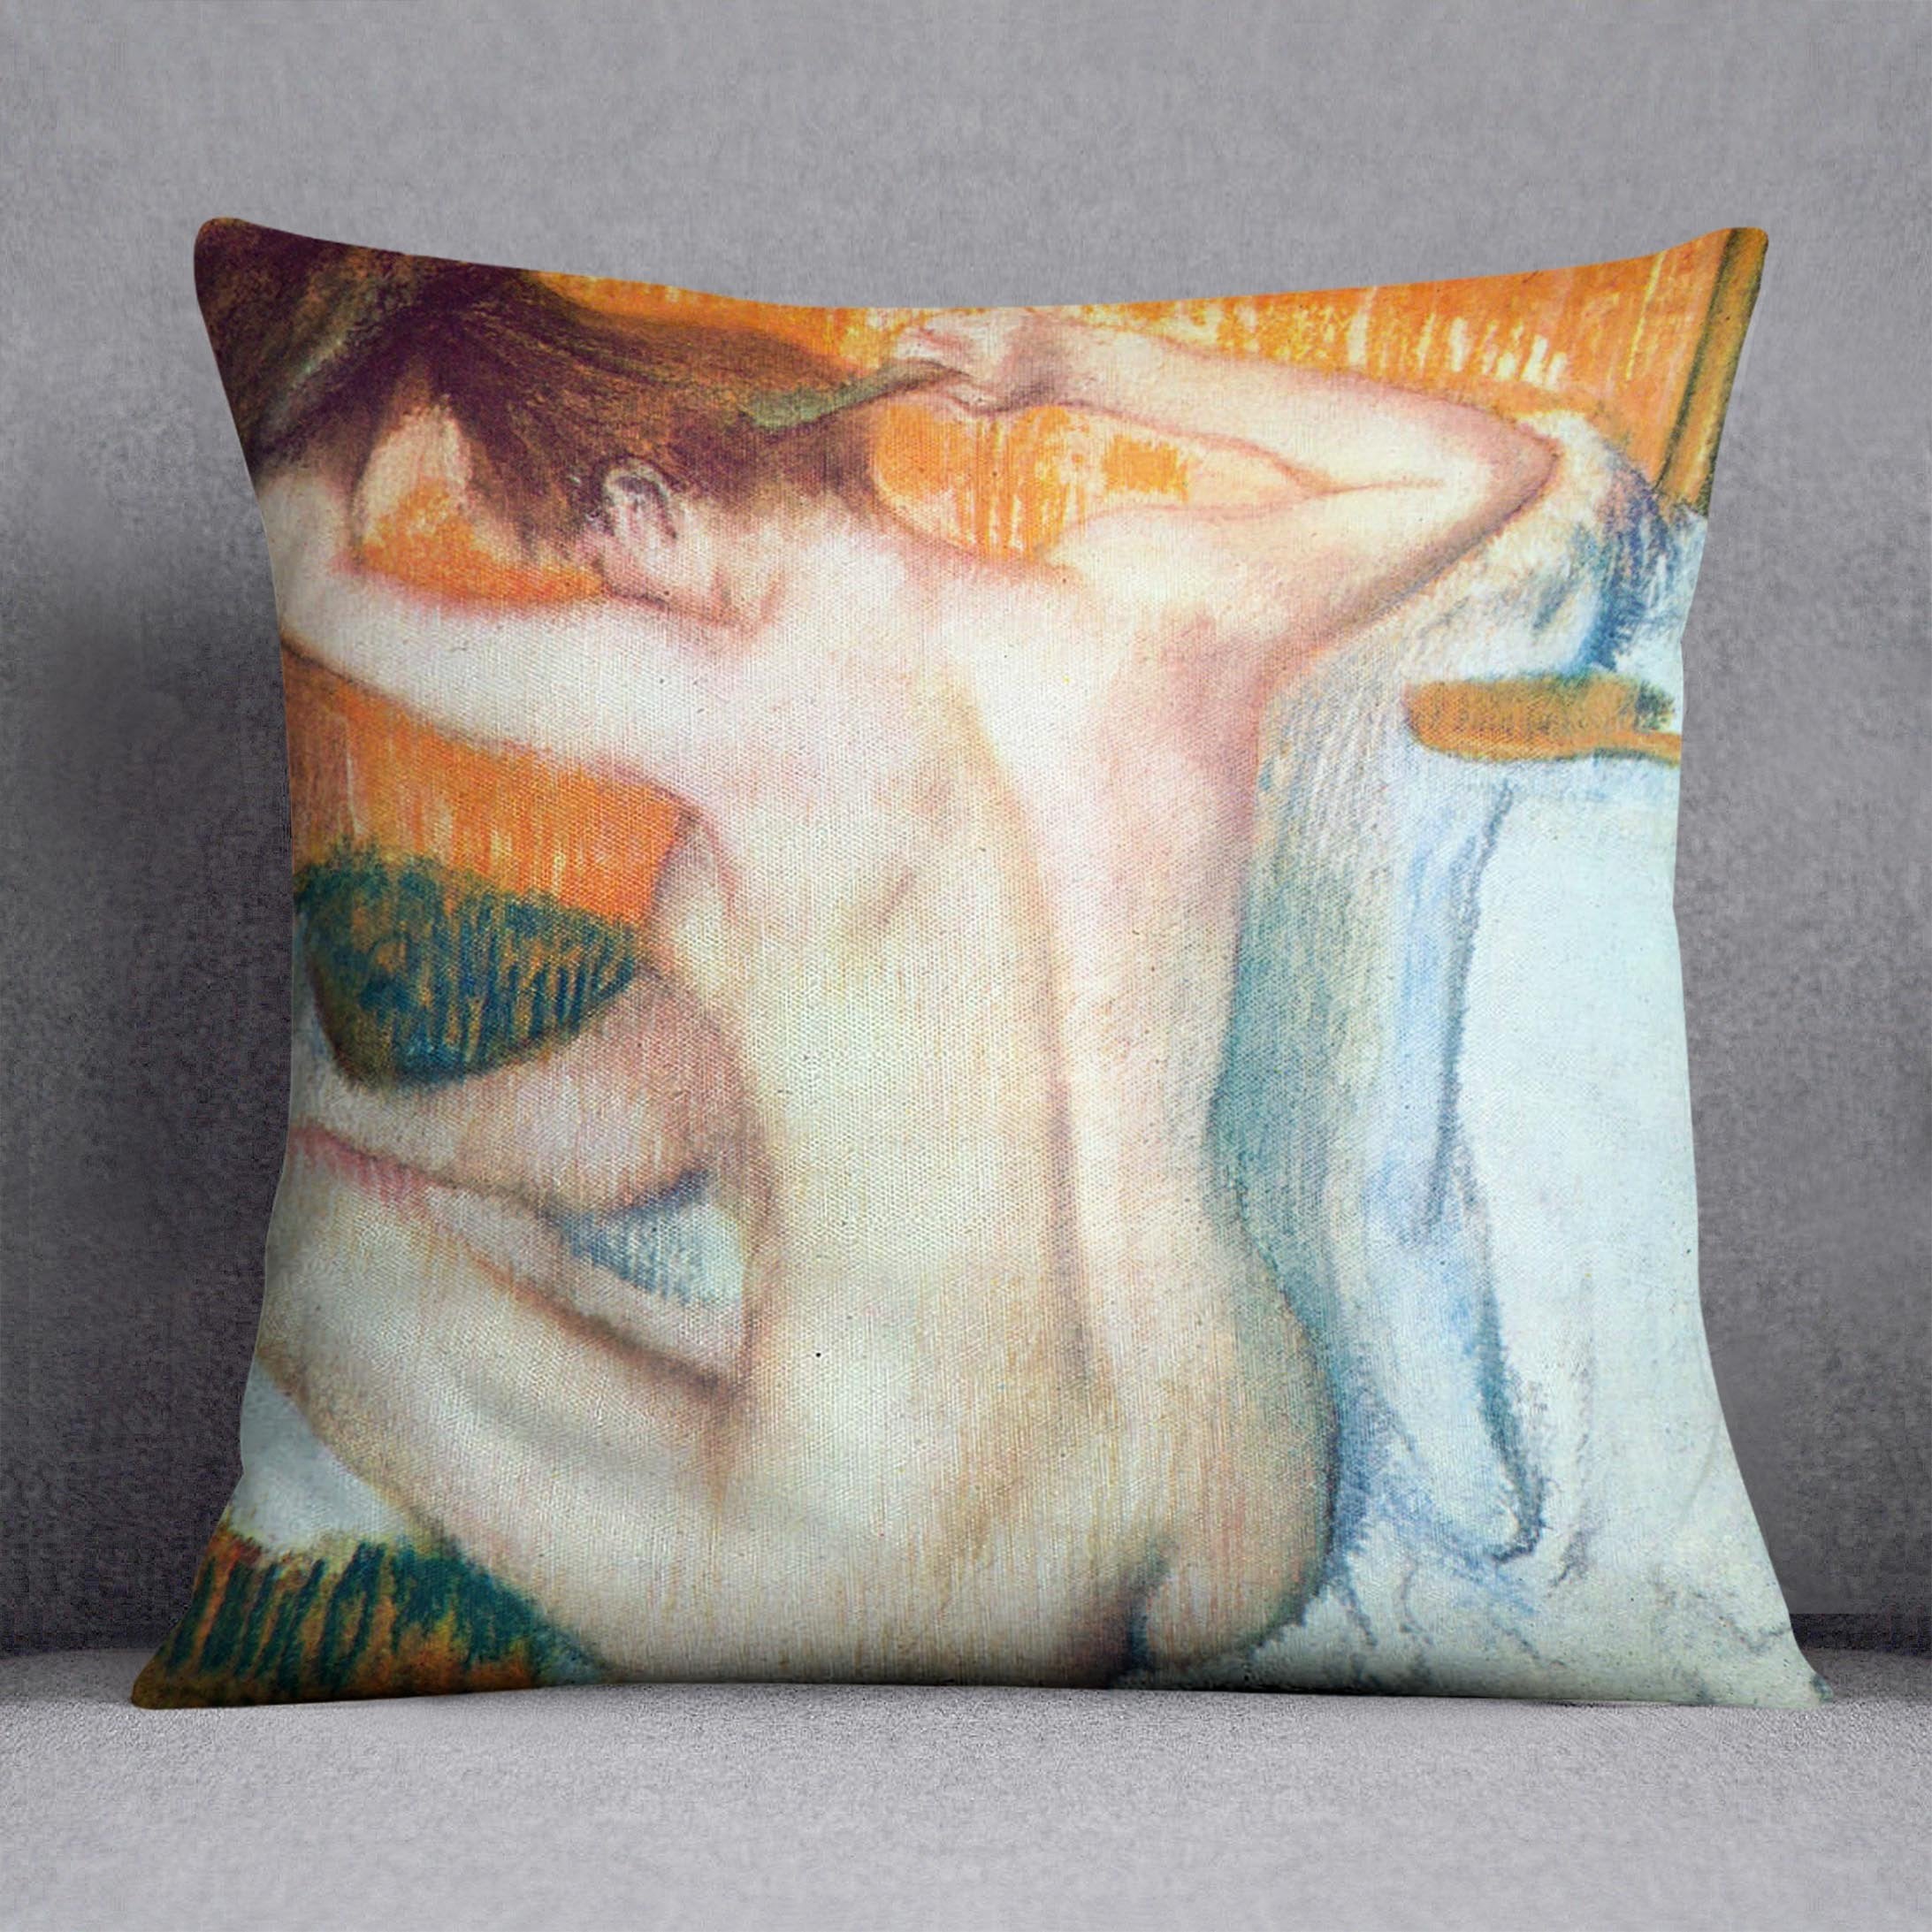 Women at the toilet 2 by Degas Cushion